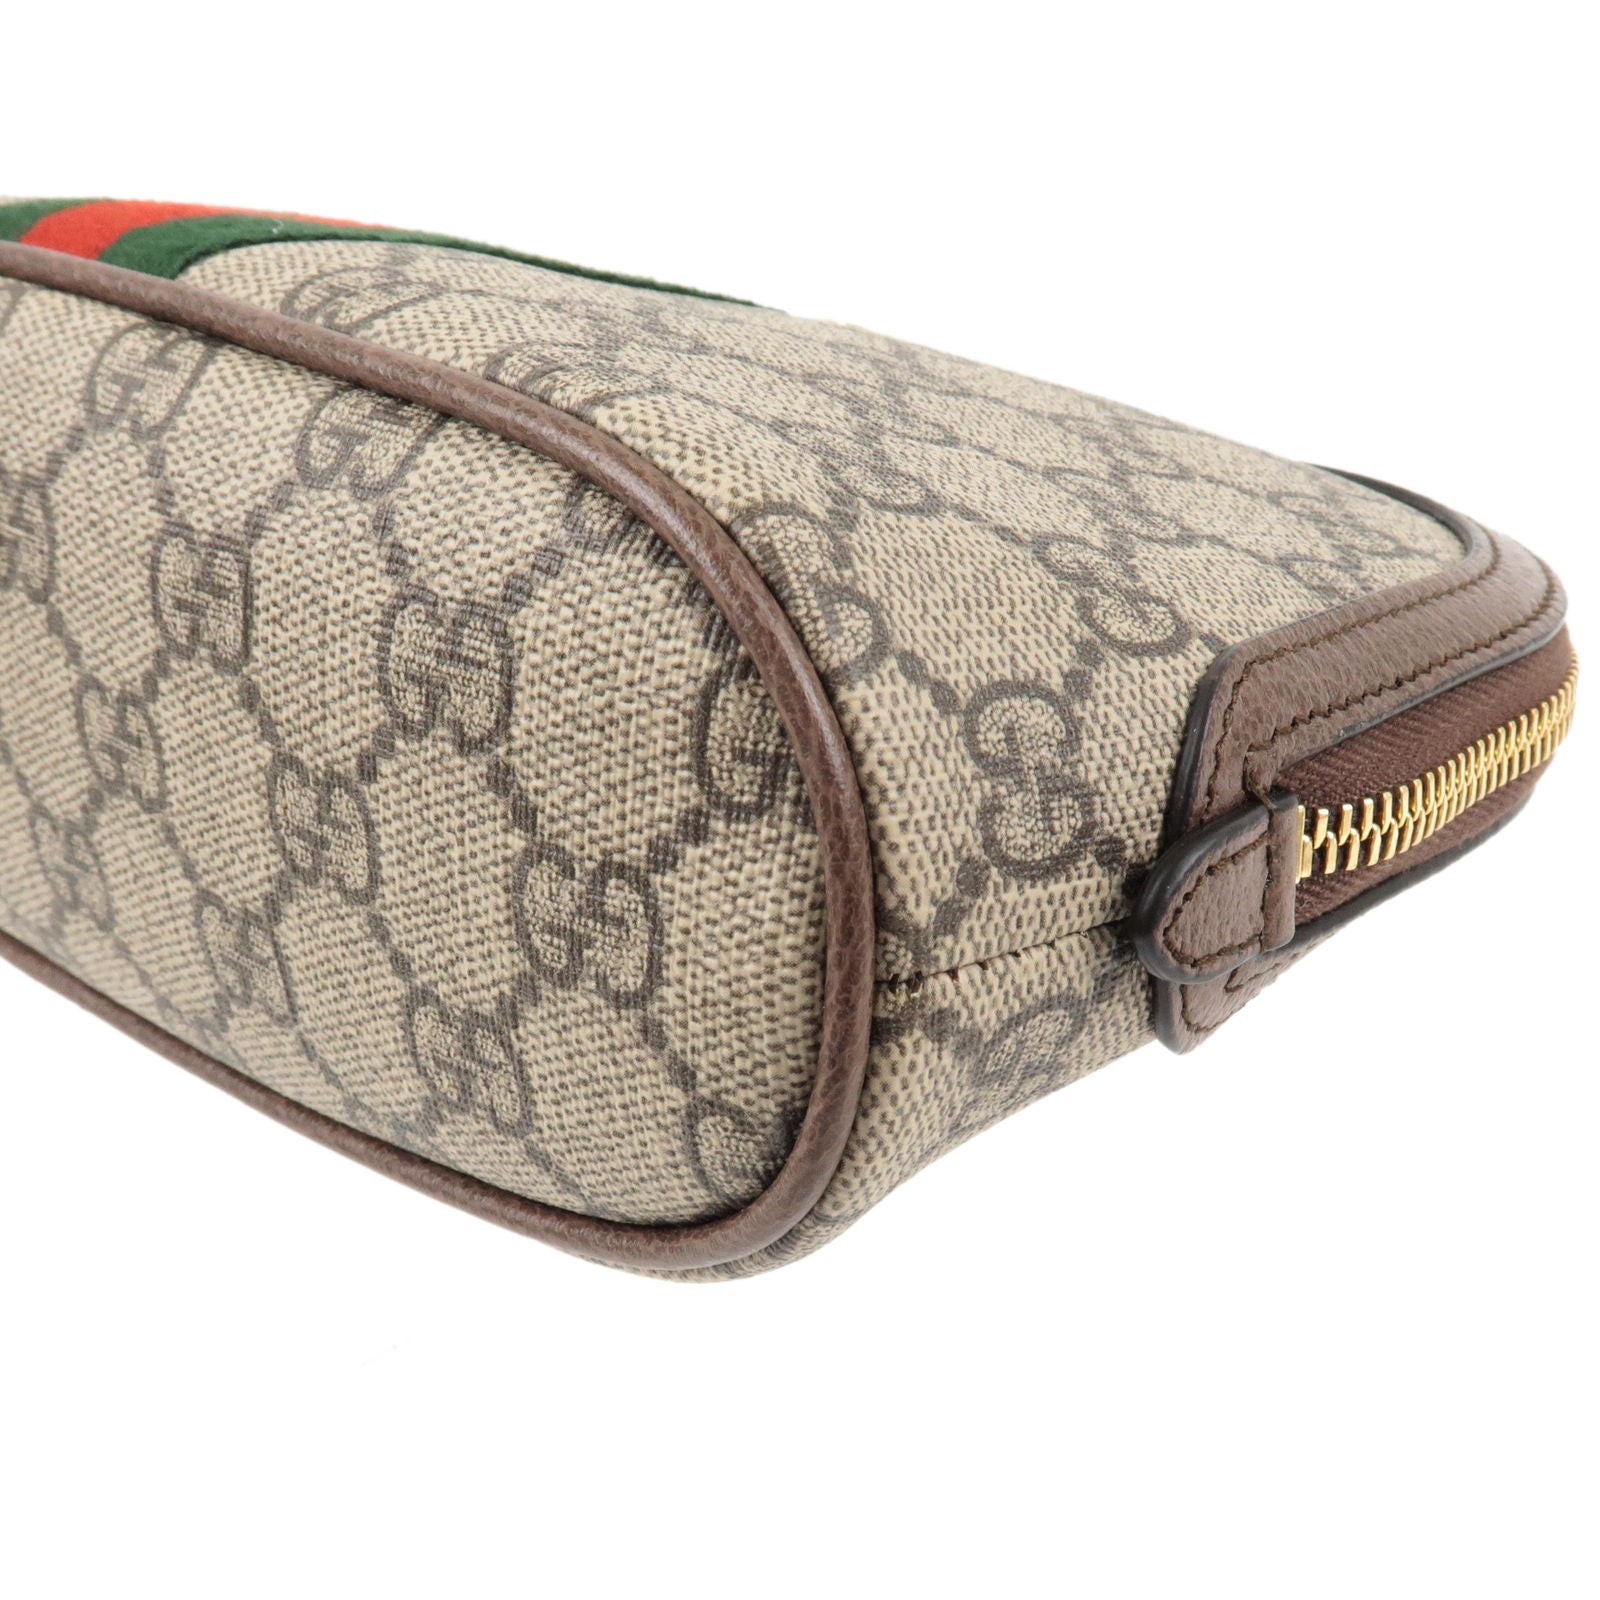 GUCCI-Ophidia-Sherry-GG-Supreme-Leather-Cosmetic-Pouch-625551 –  dct-ep_vintage luxury Store